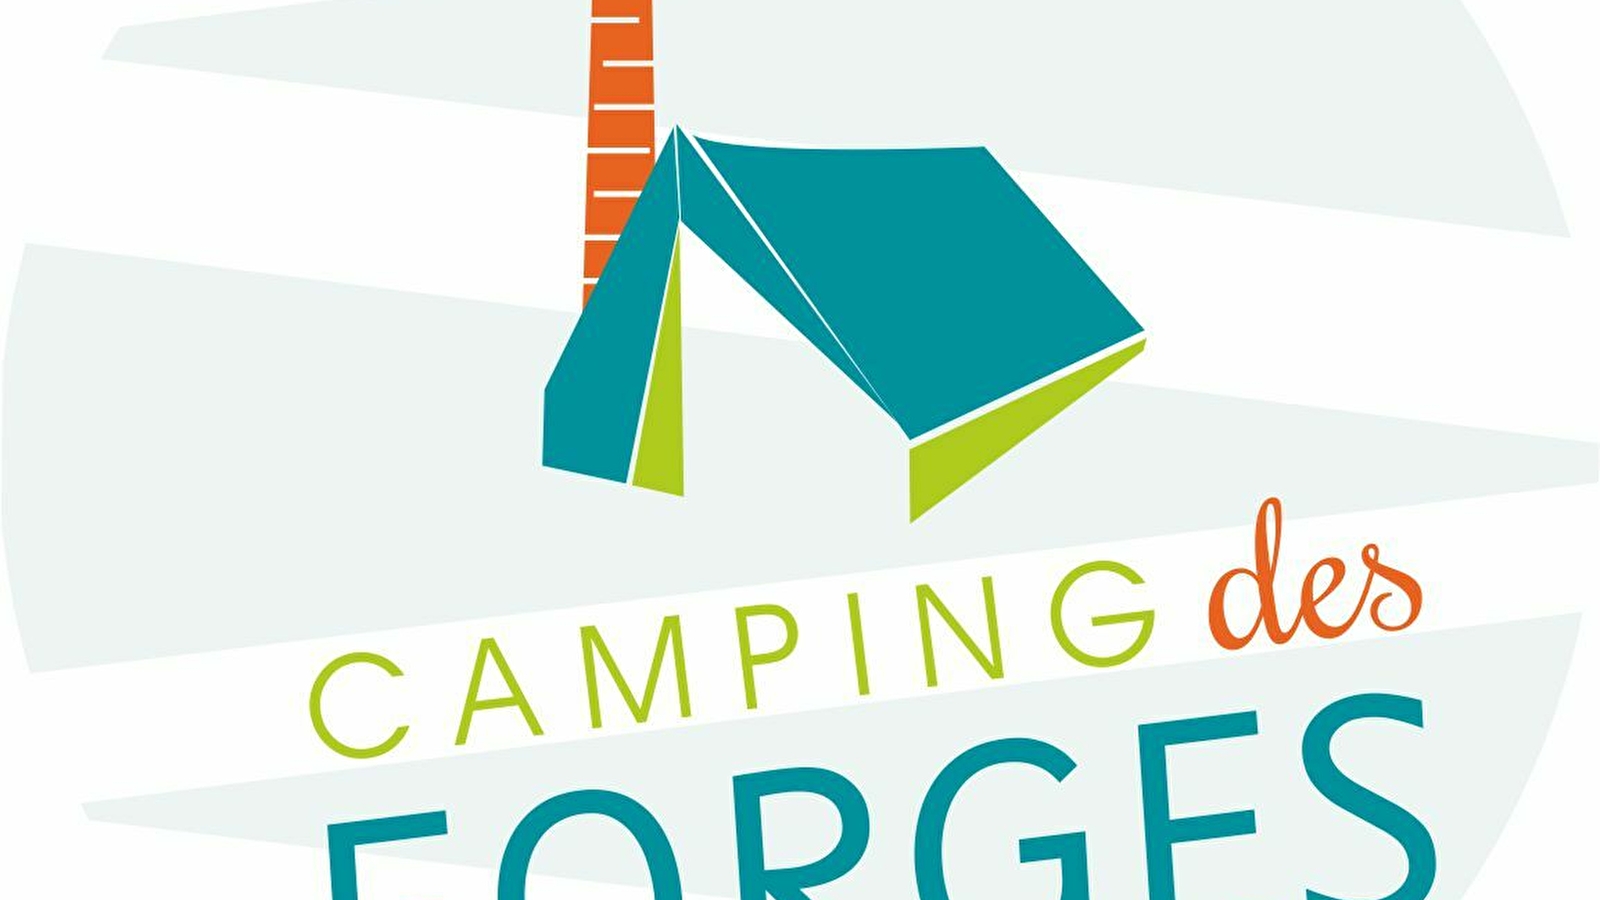 Camping des Forges